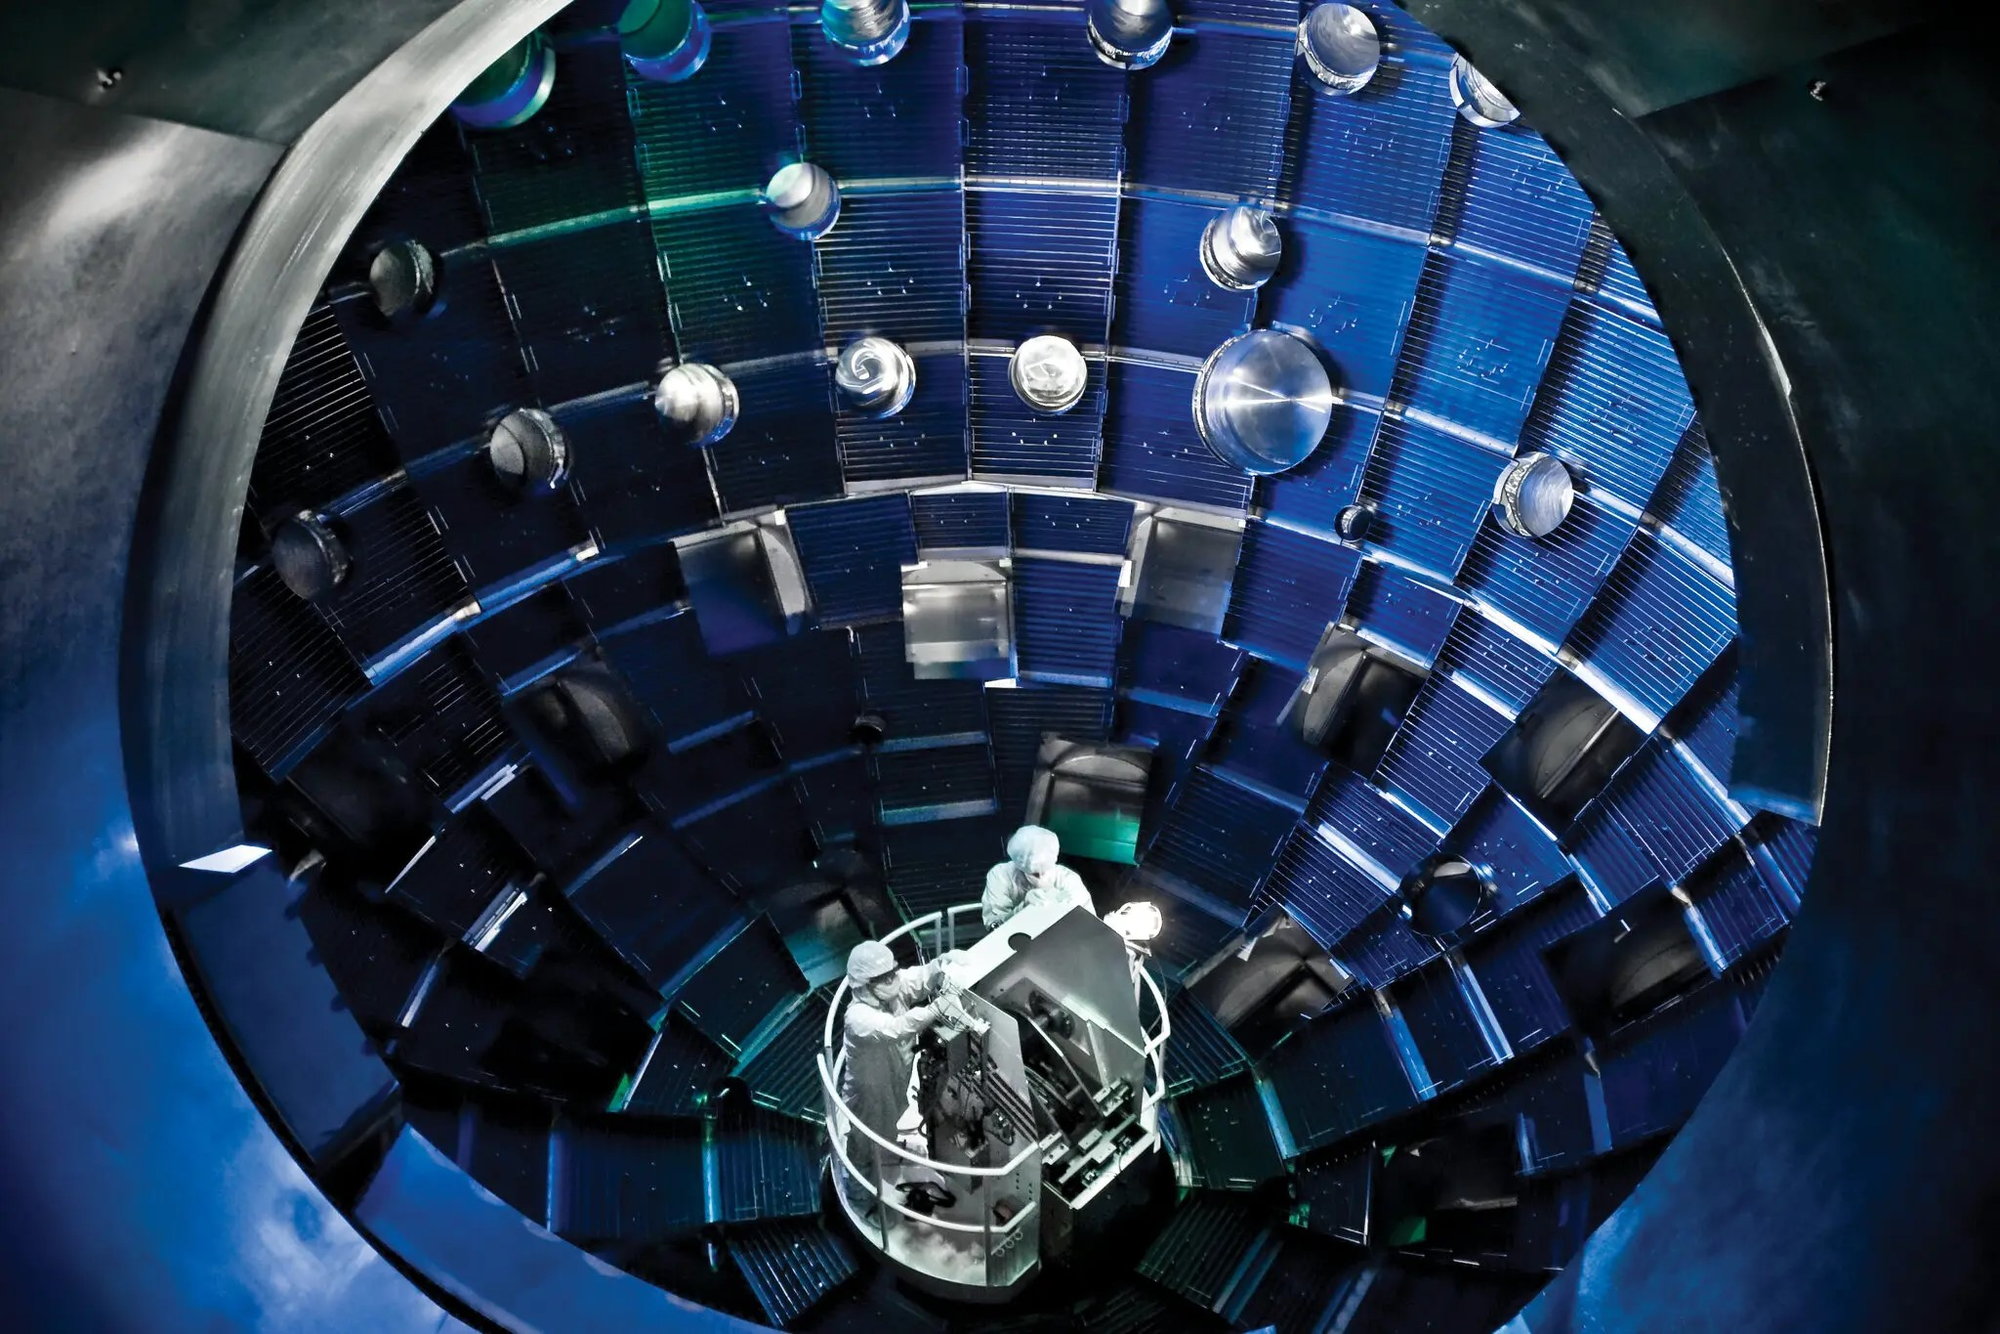 Physicists conduct nuclear fusion experiments at the National Ignition Facility in California's Lawrence Livermore National Laboratory.